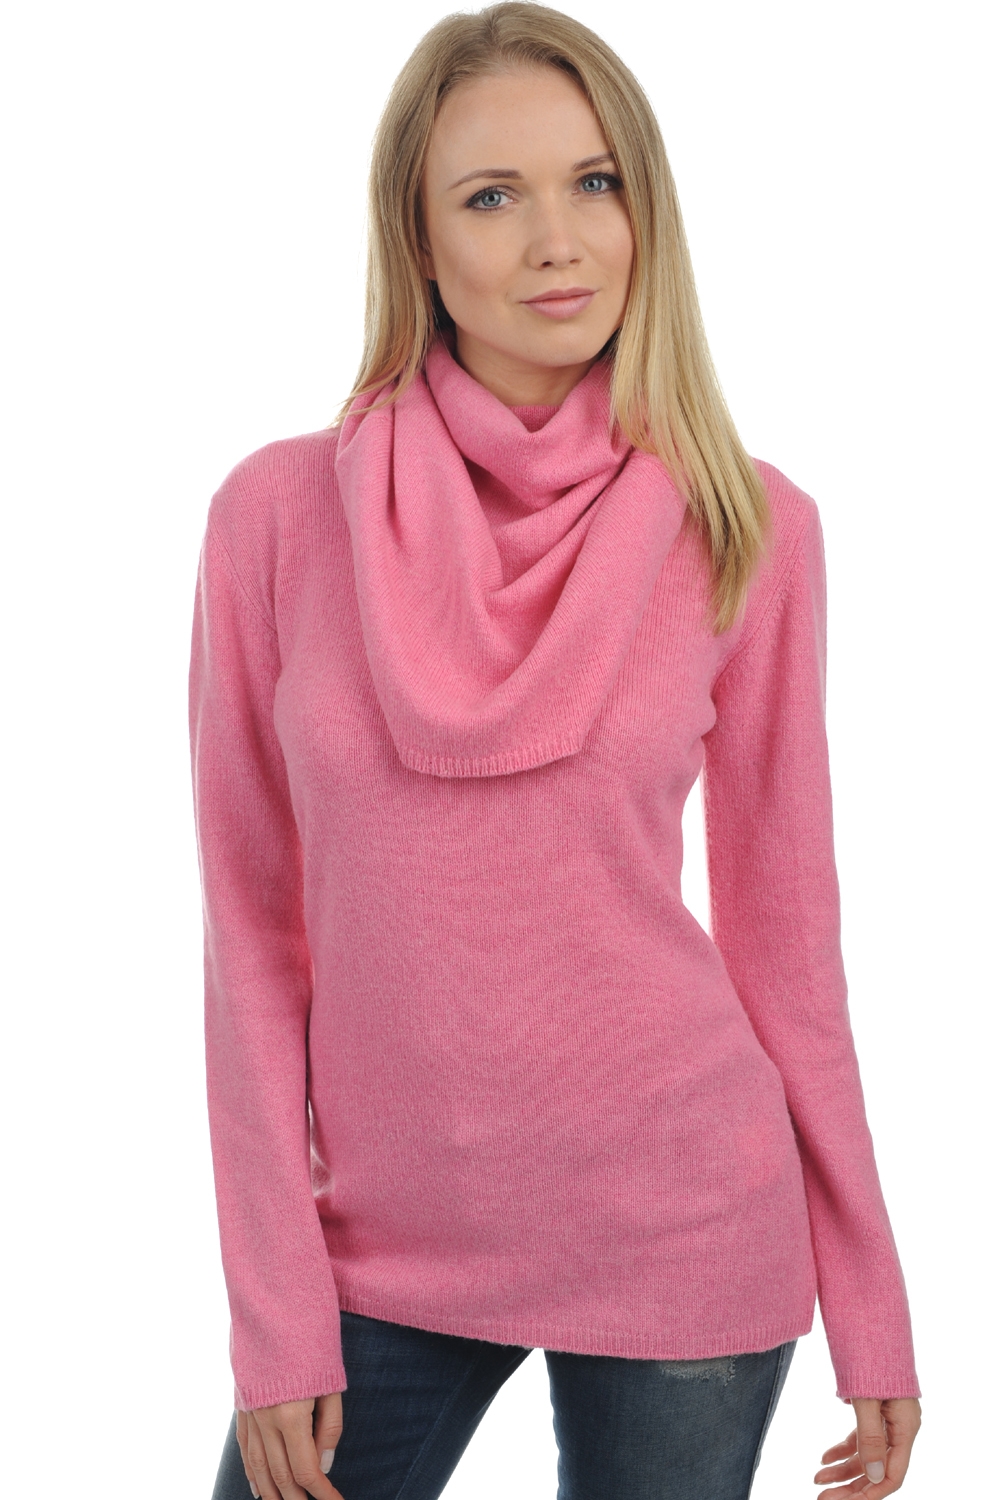 Yak pull femme col roule yness pink 3xl